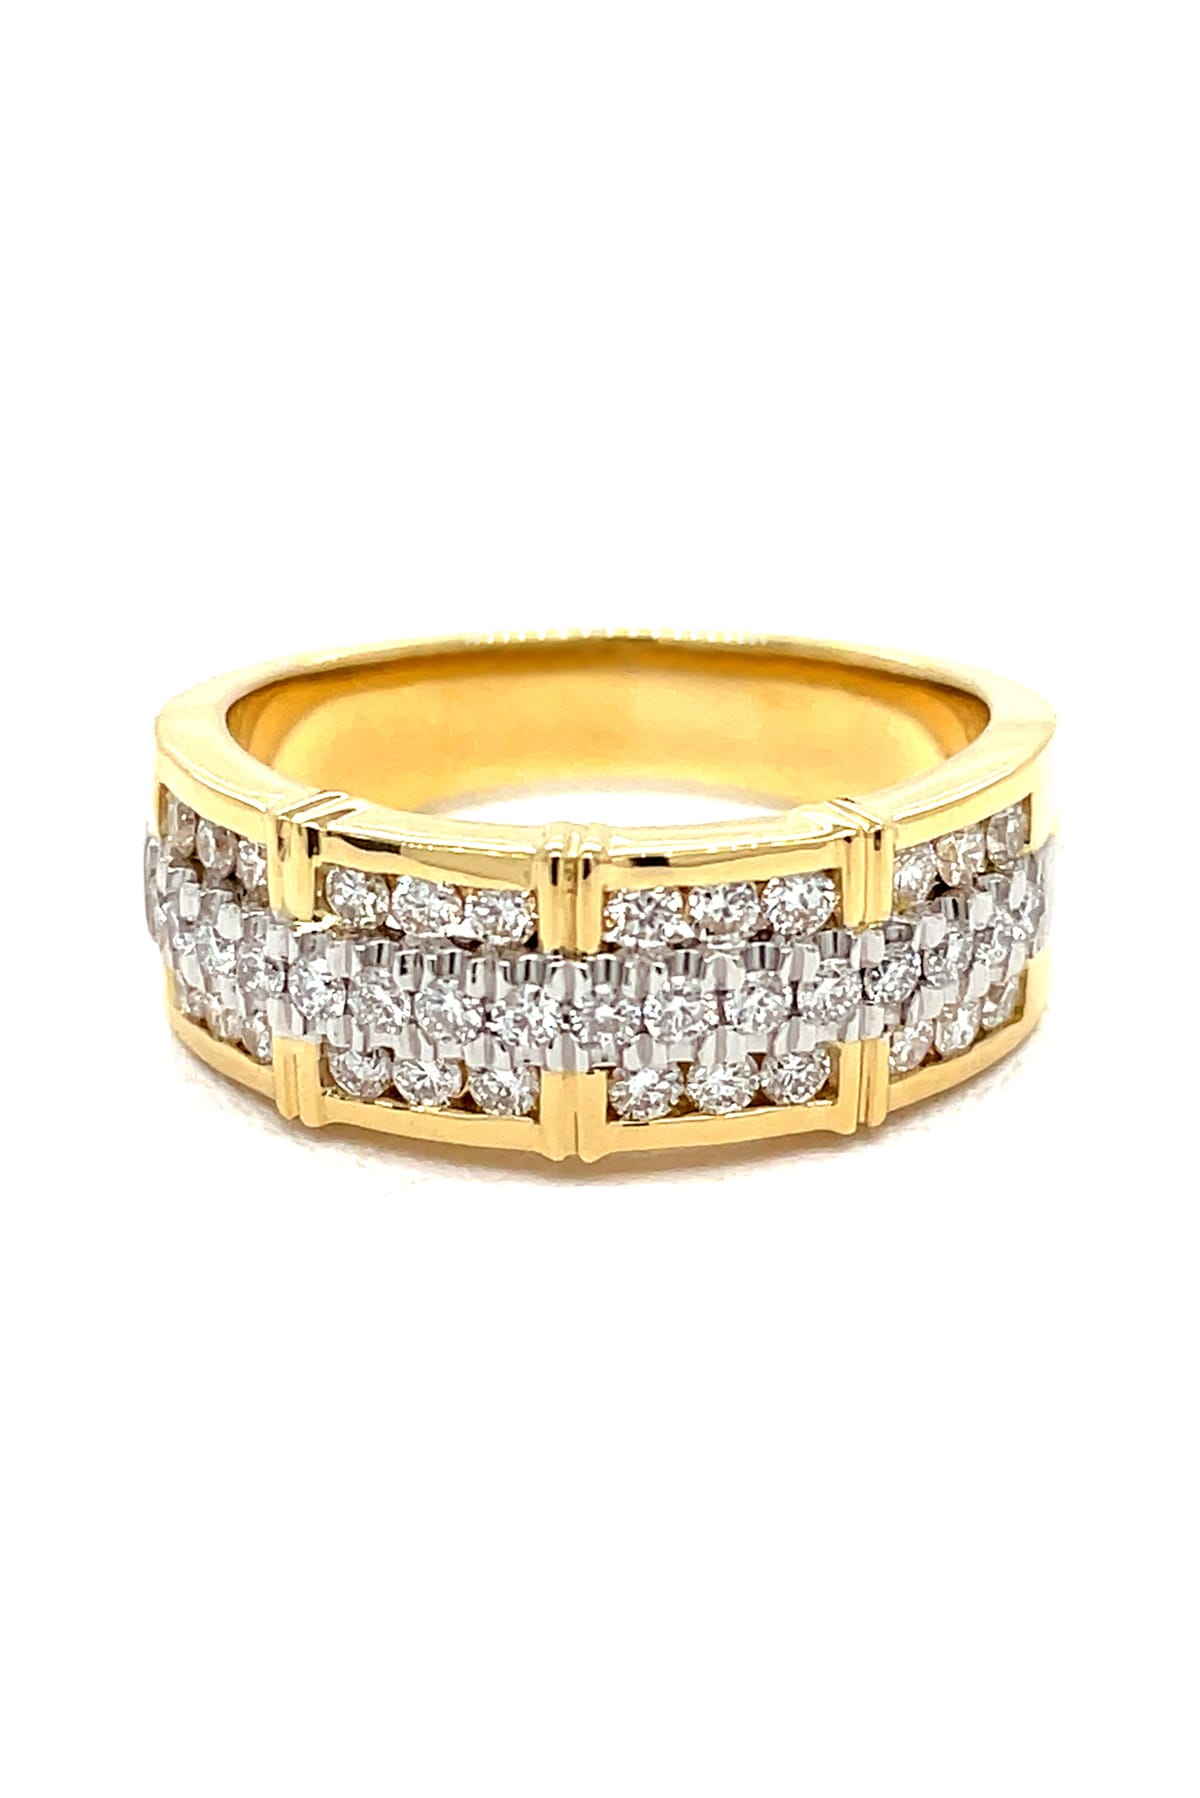 Square Set Diamond Ring In Yellow And White Gold available at LeGassick Diamonds and Jewellery Gold Coast, Australia.